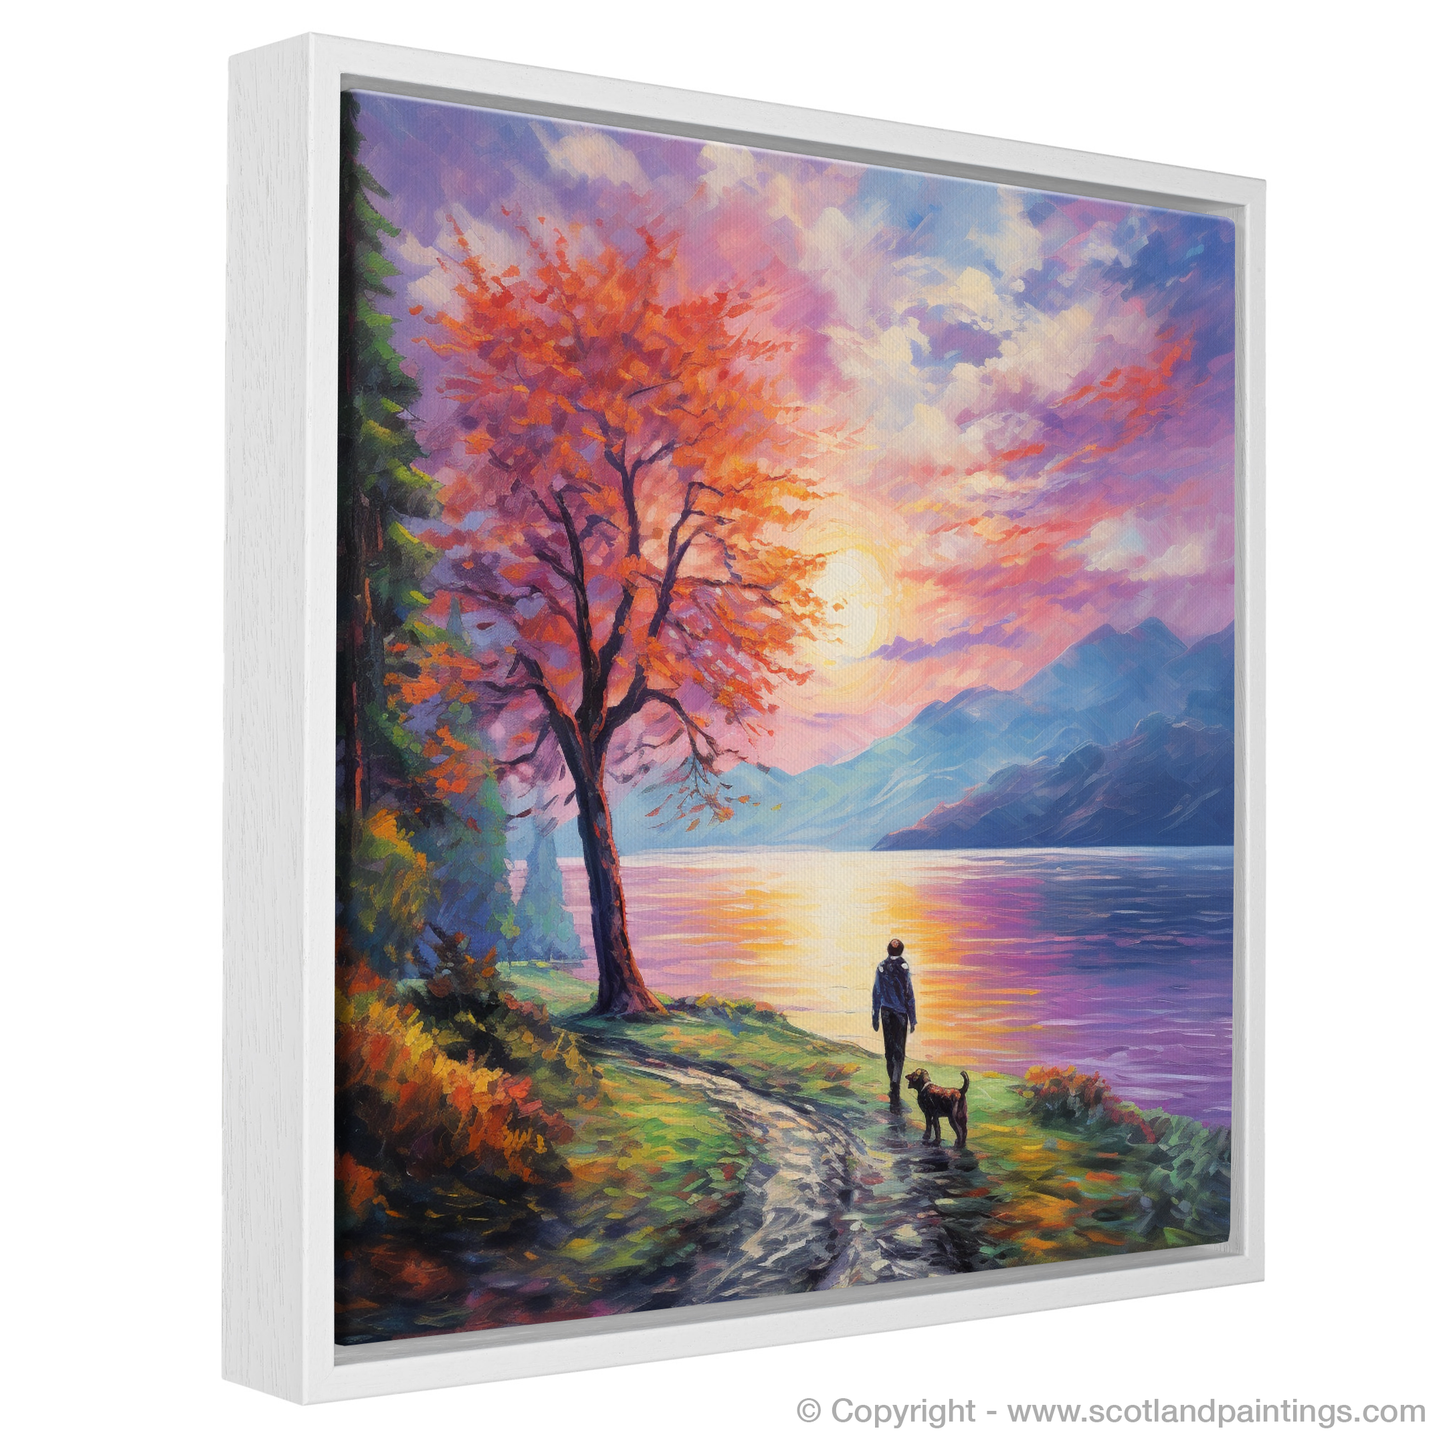 Painting and Art Print of A man walking dog at the side of Loch Lomond entitled "A Stroll by Loch Lomond: An Impressionist Tribute to Nature's Splendour".